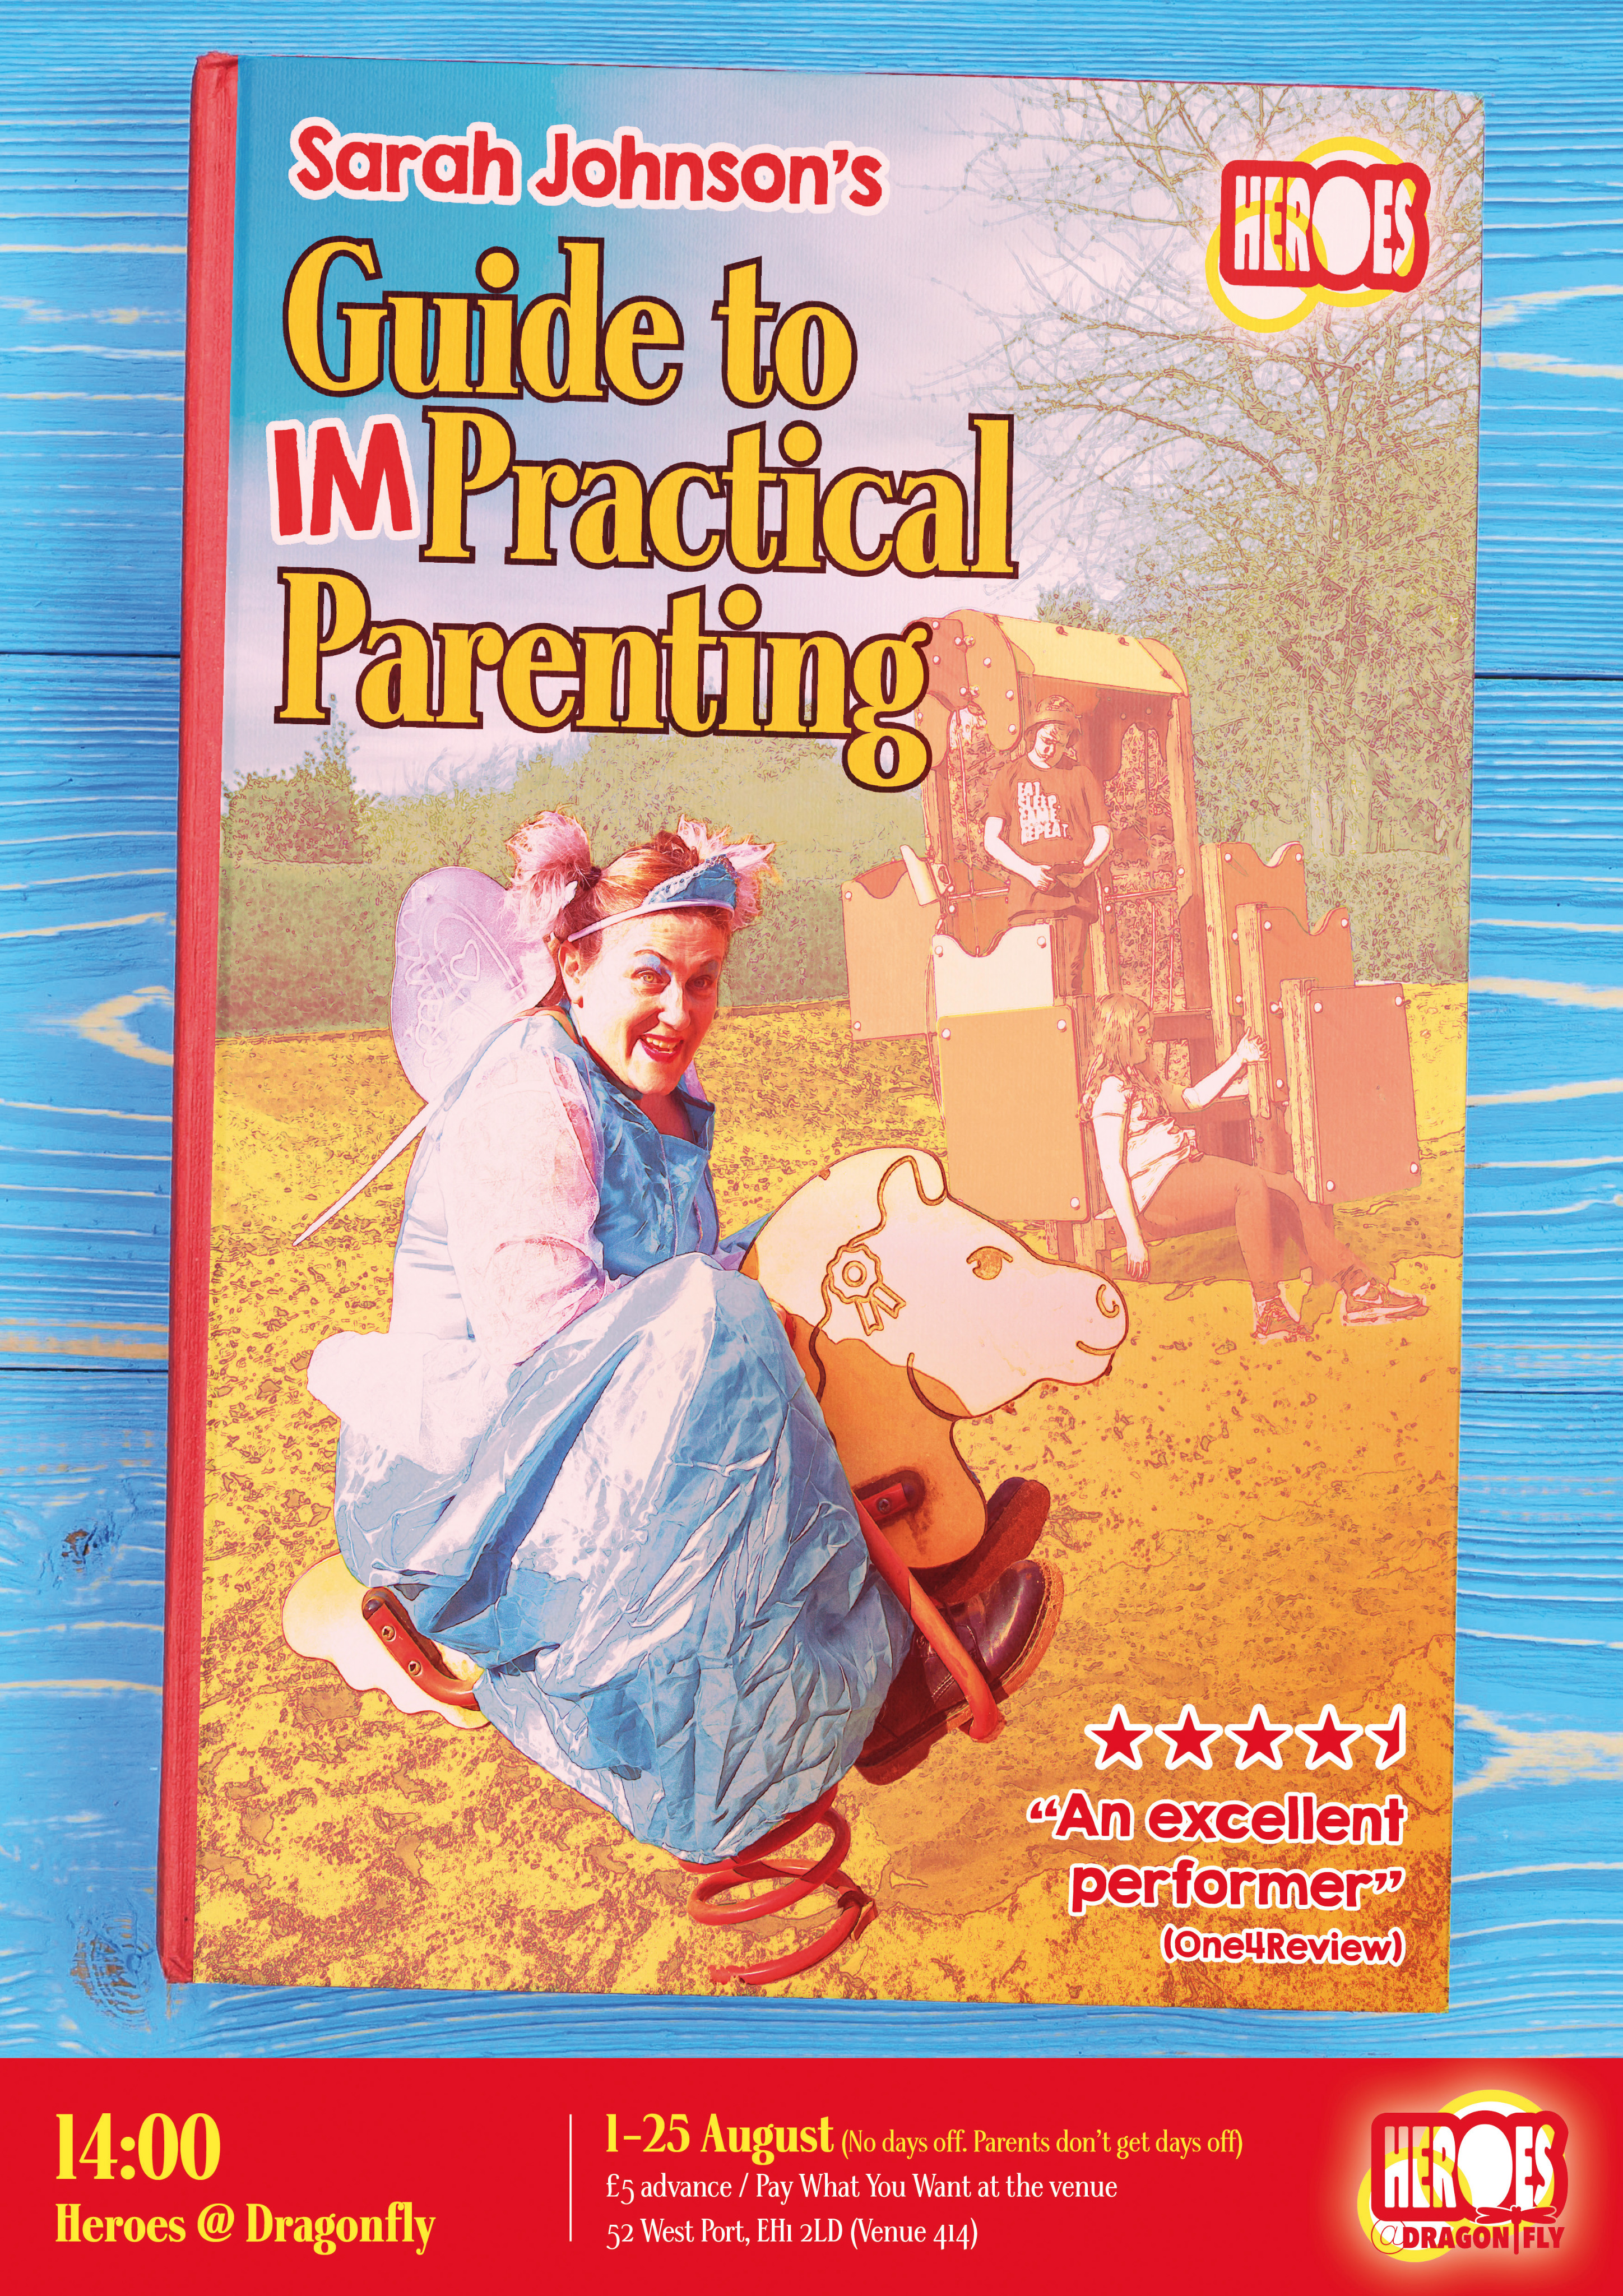 The poster for Sarah Johnson's Guide to (Im)Practical Parenting